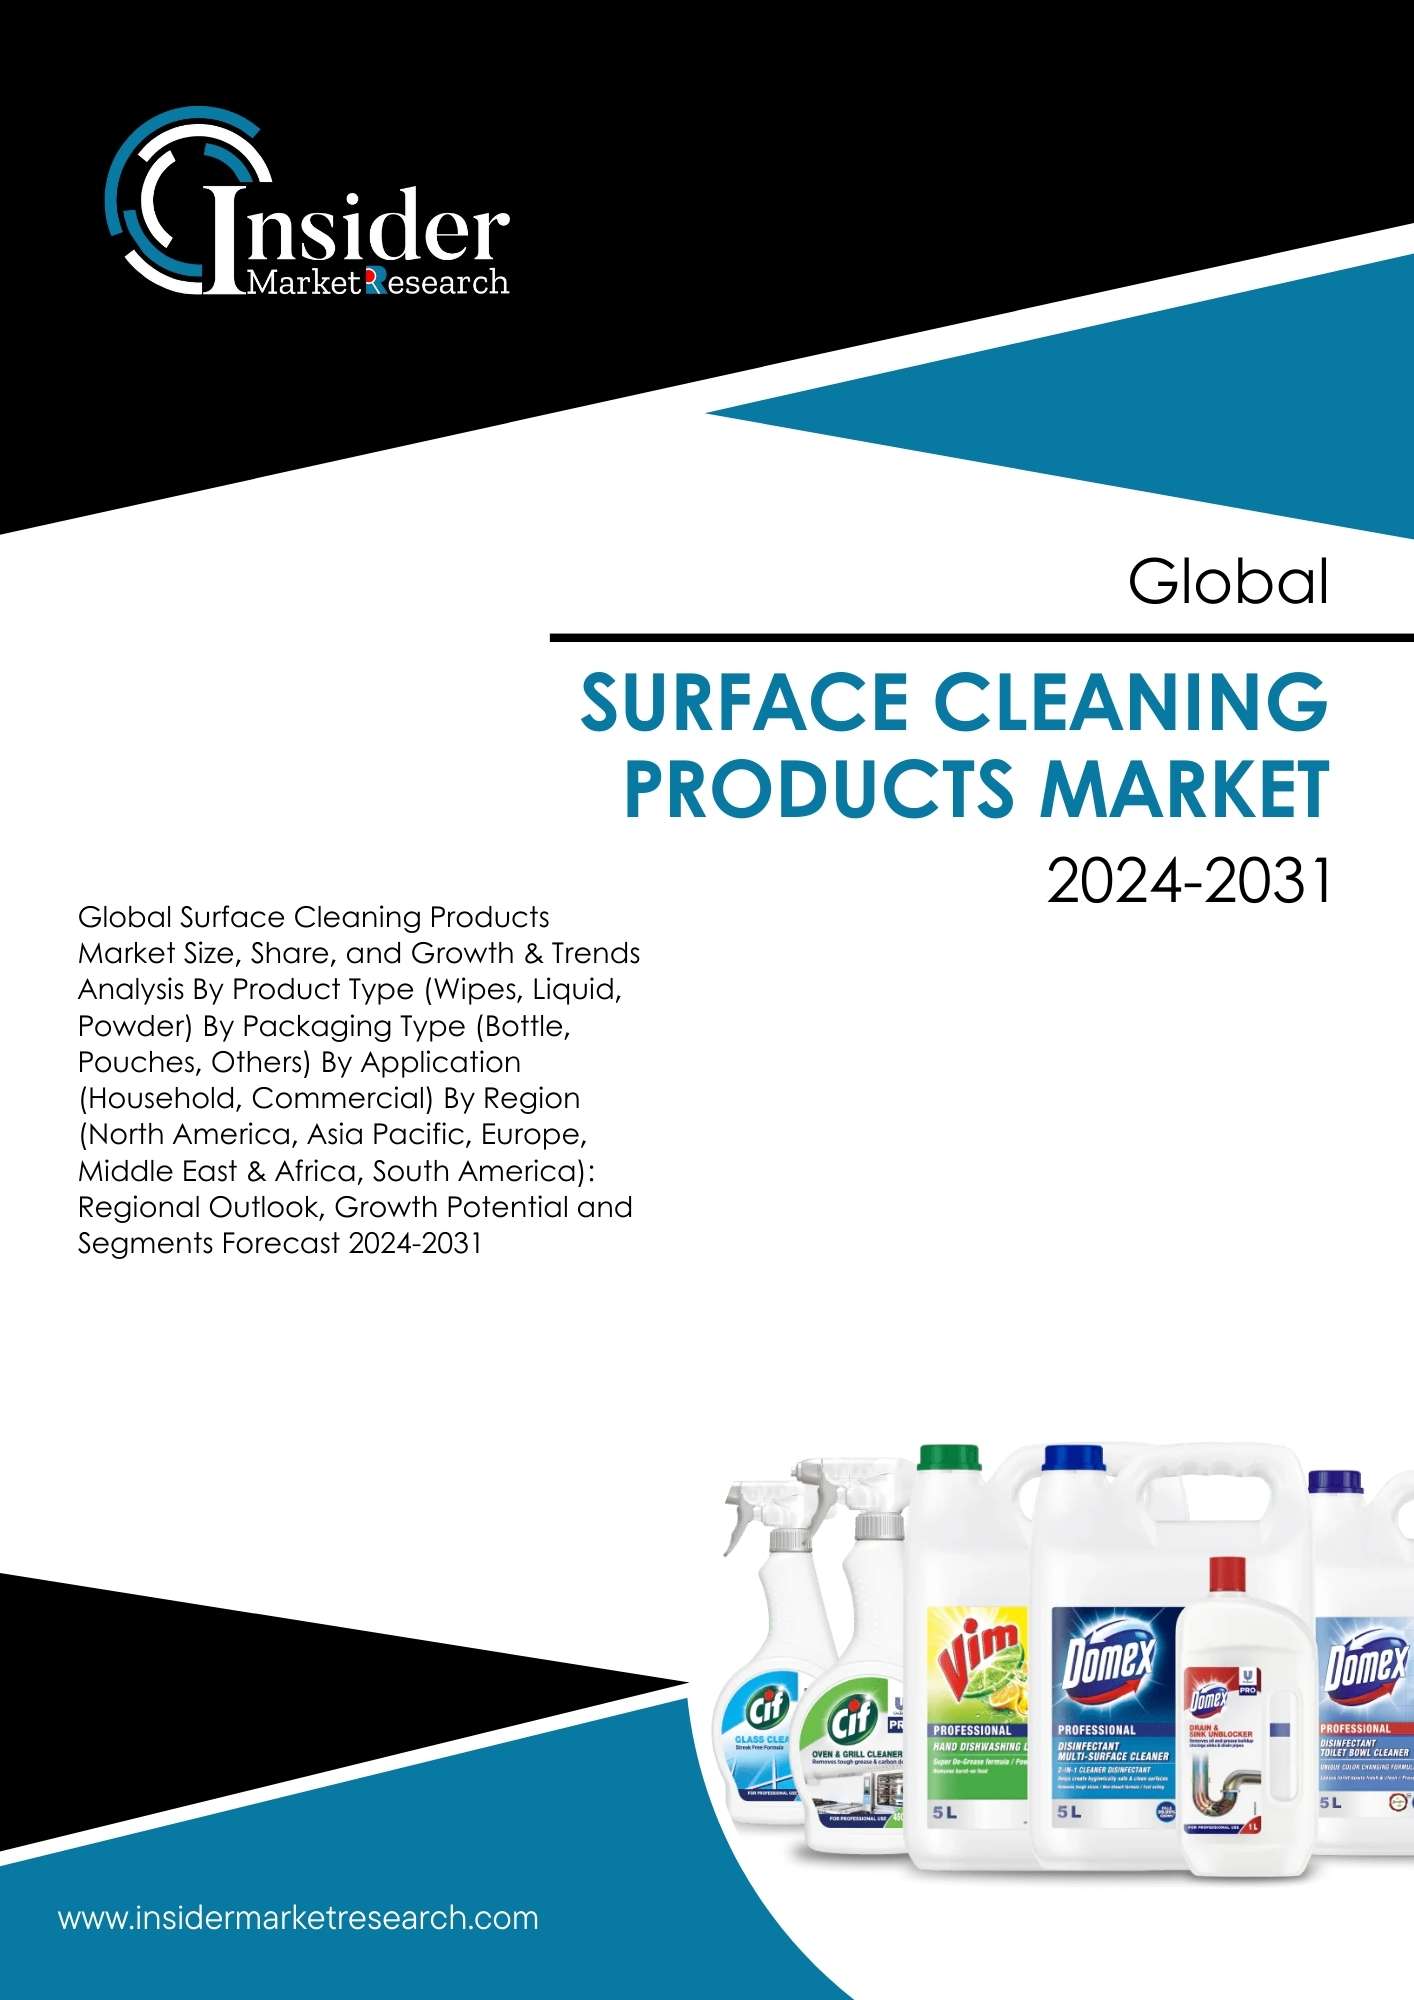 Surface Cleaning Products Market Global Size, Share, Growth and Forecast to 2031 | Insider Market Research